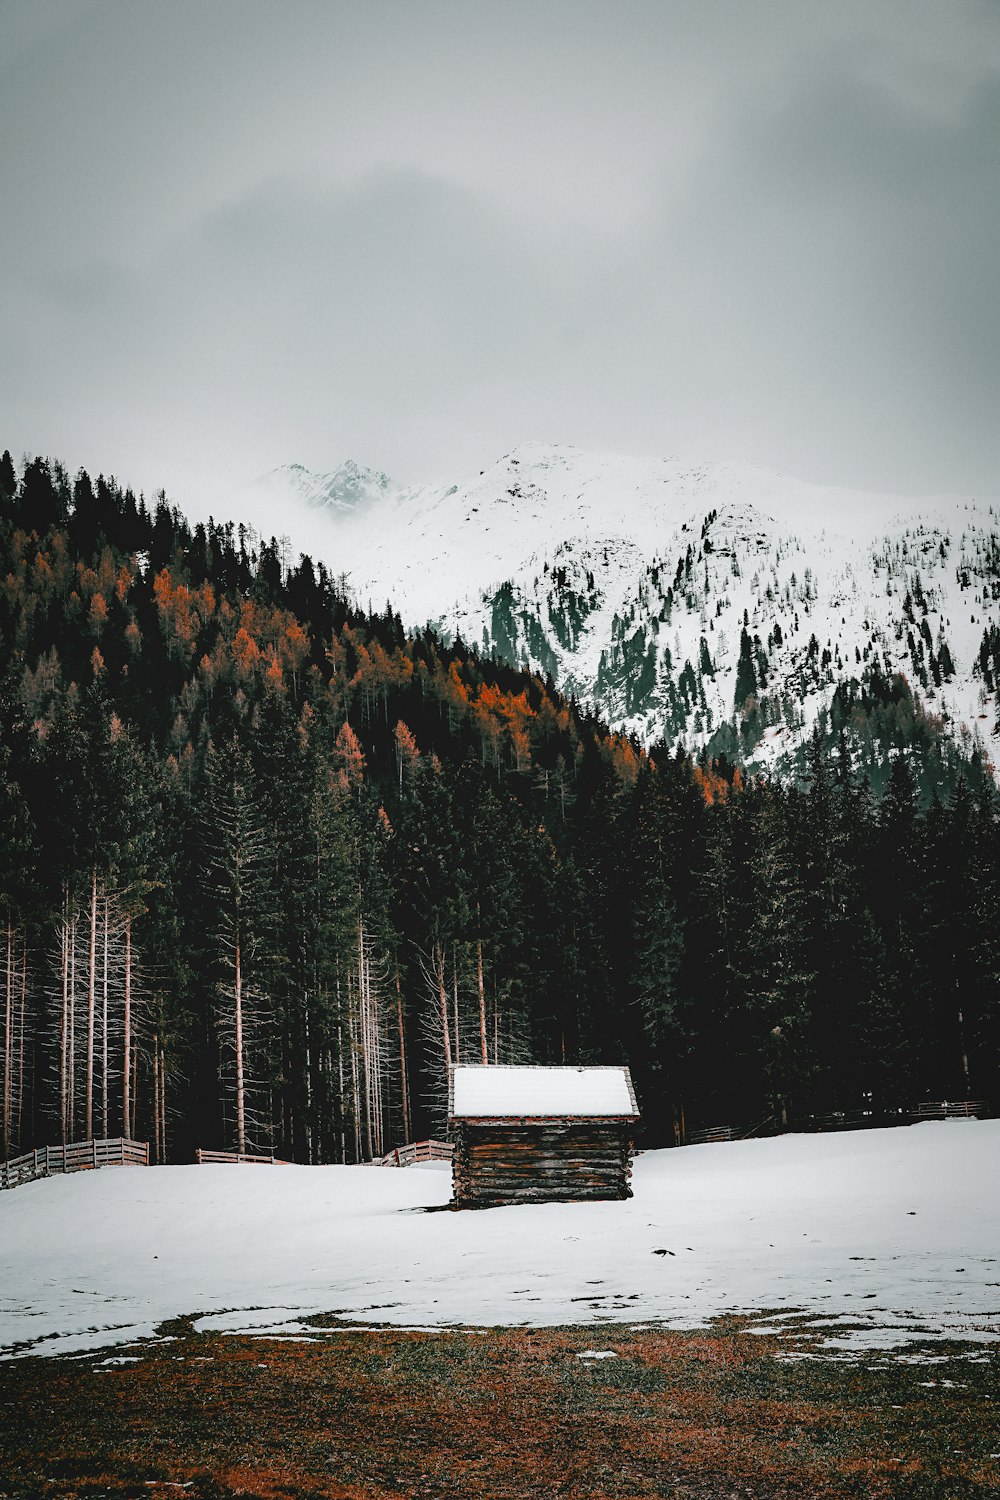 a cabin in the middle of a snowy field